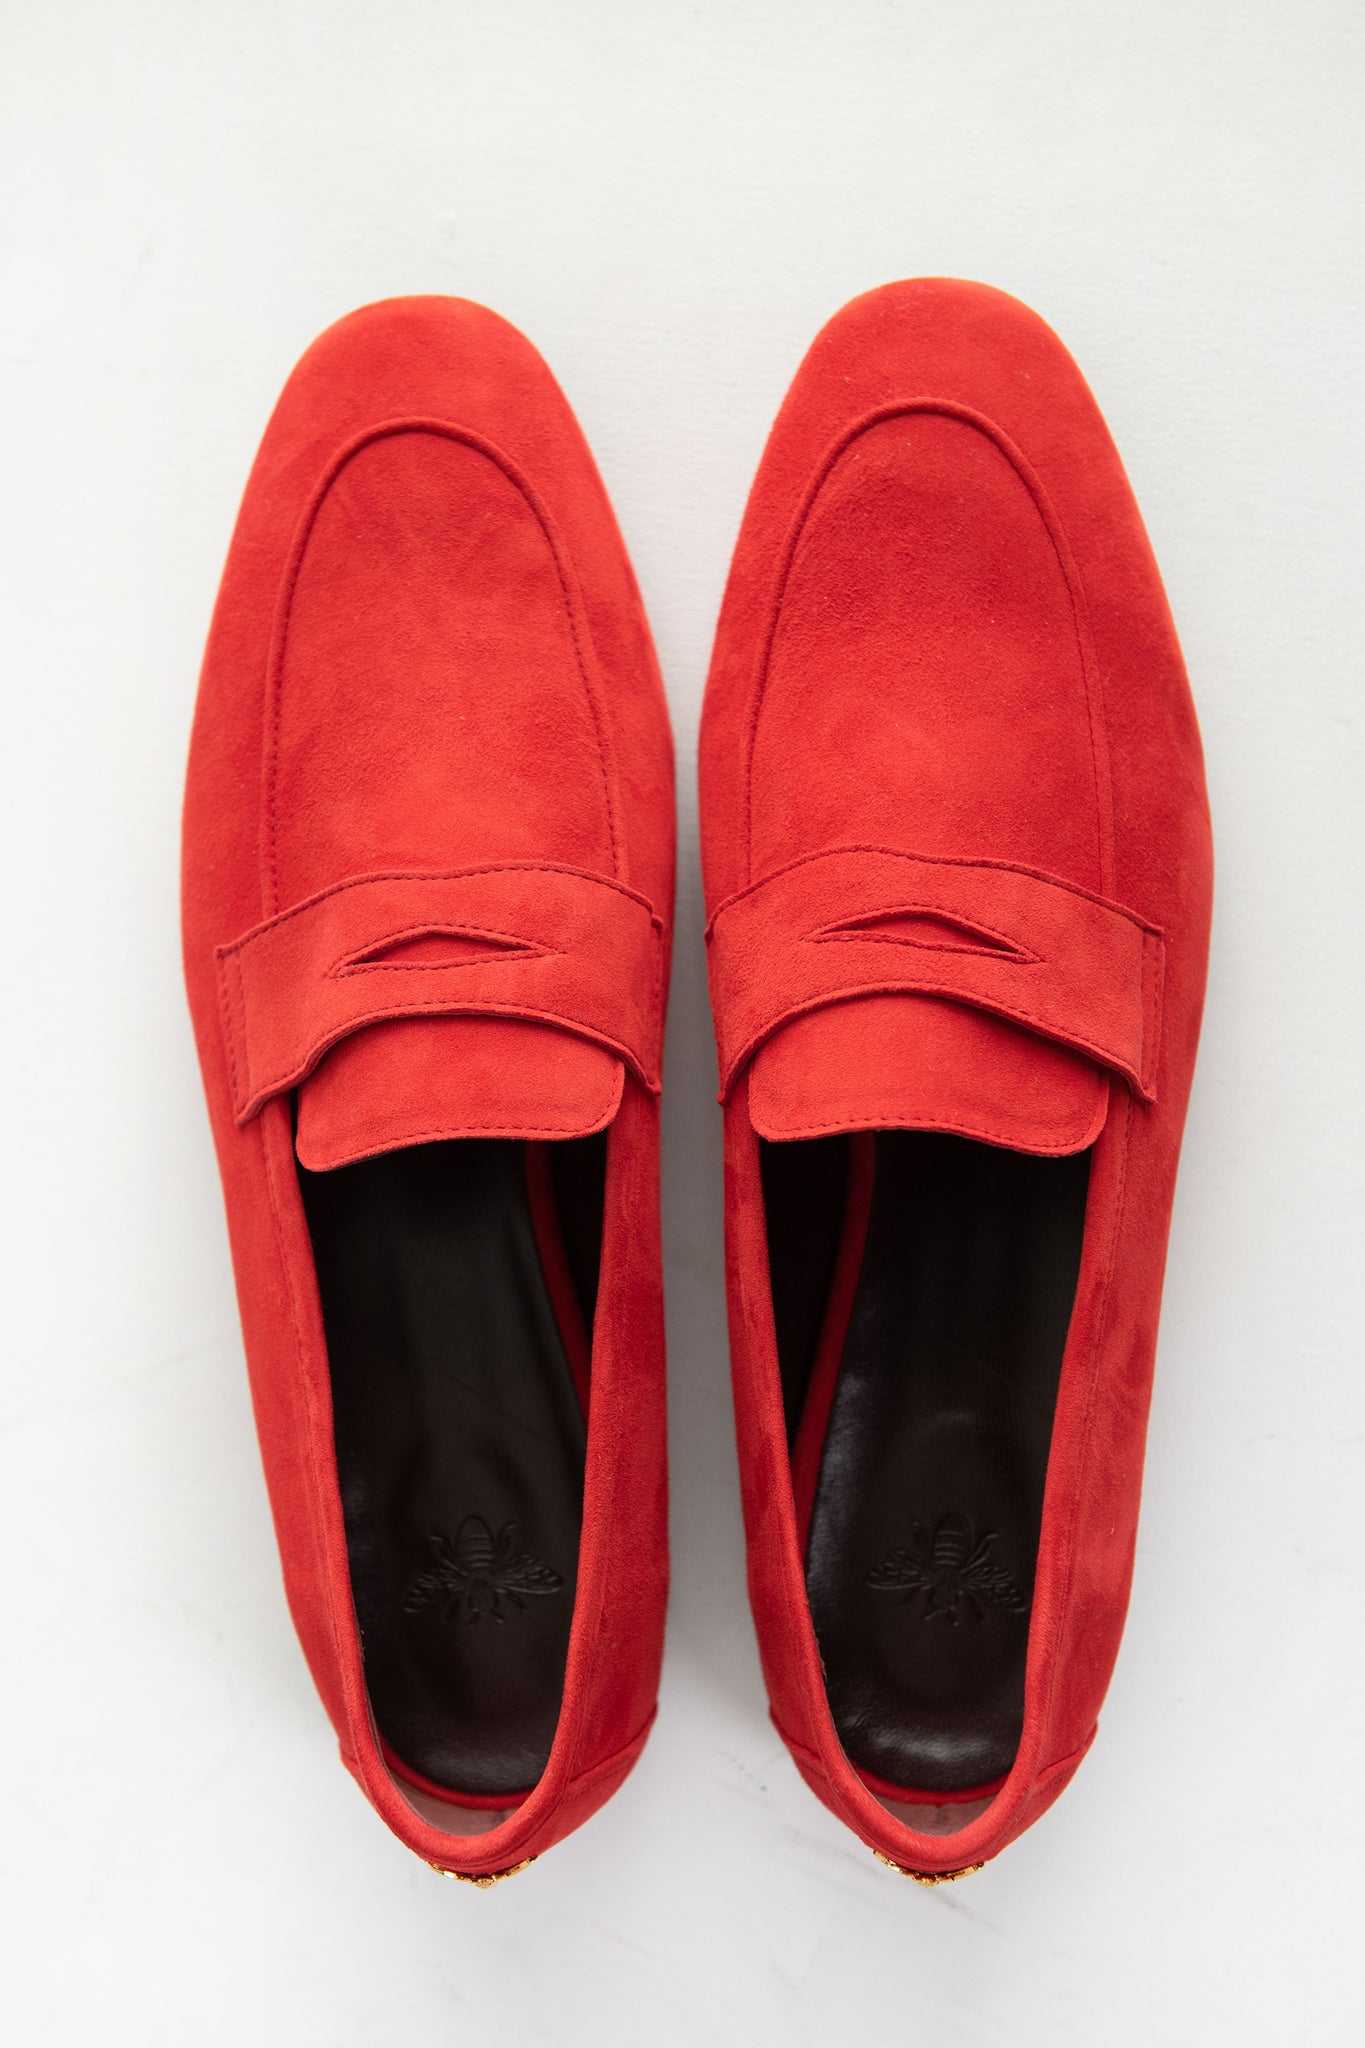 BOUGEOTTE - Suede Flaneur, Coral Red